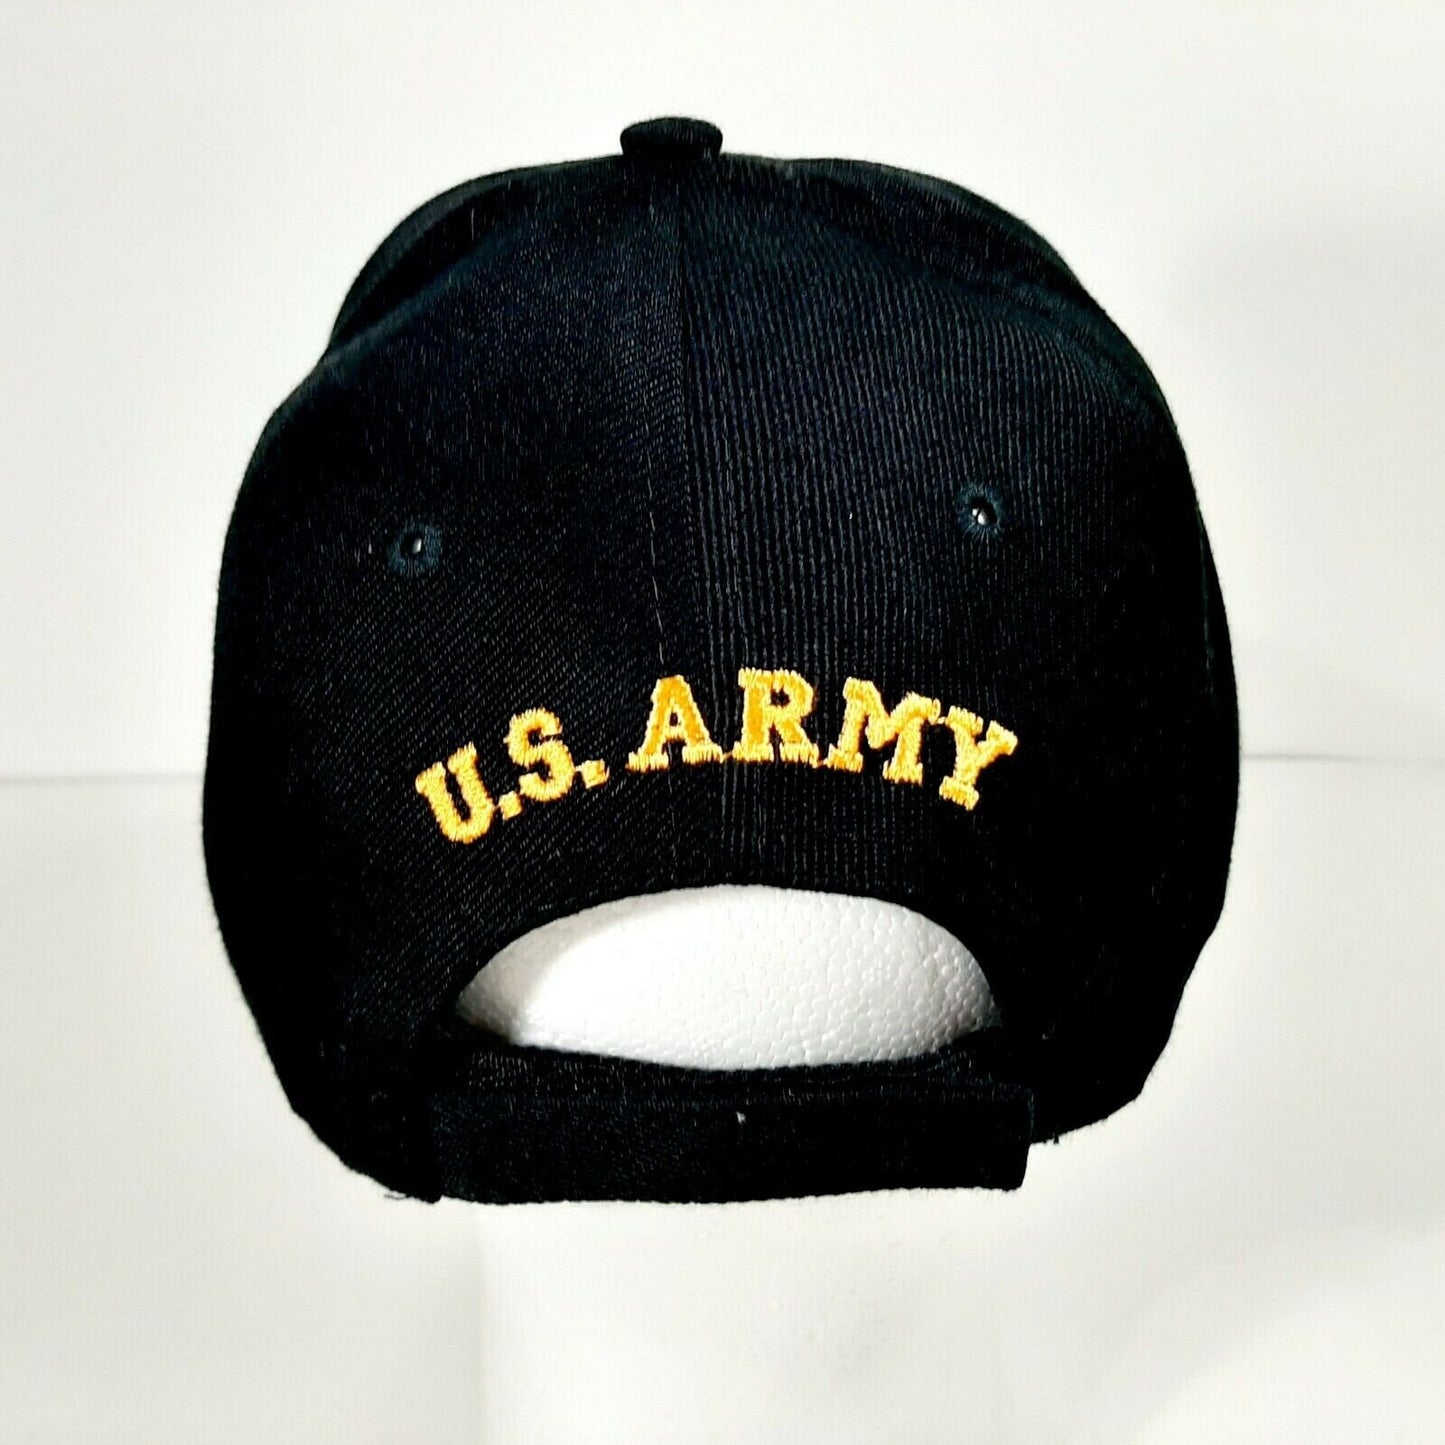 US Army Corporal Men's Ball Cap Hat Black Embroidered Acrylic